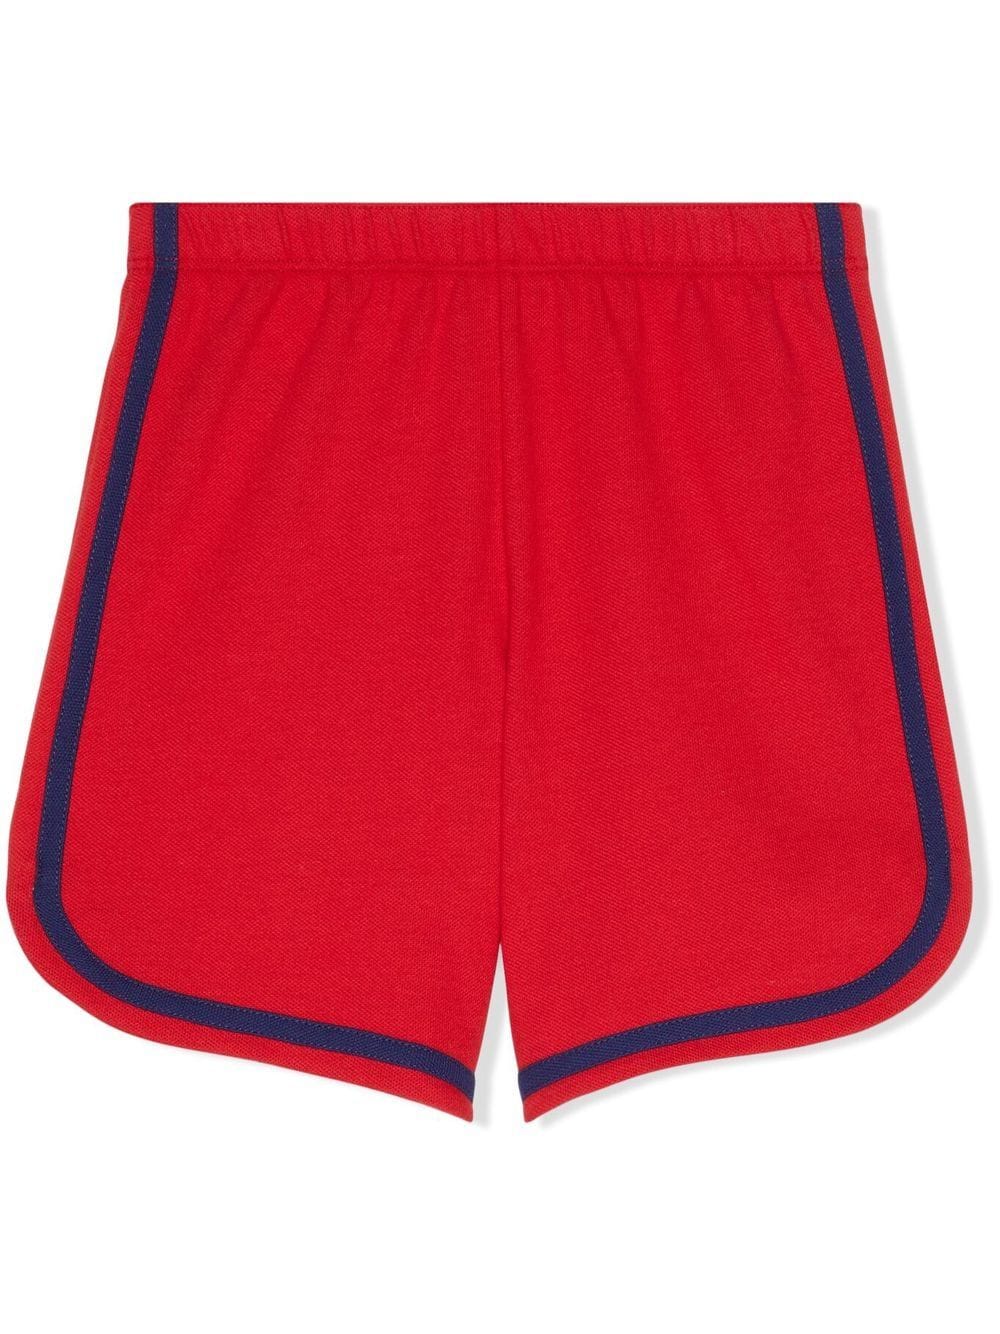 Red shorts for boys with logo